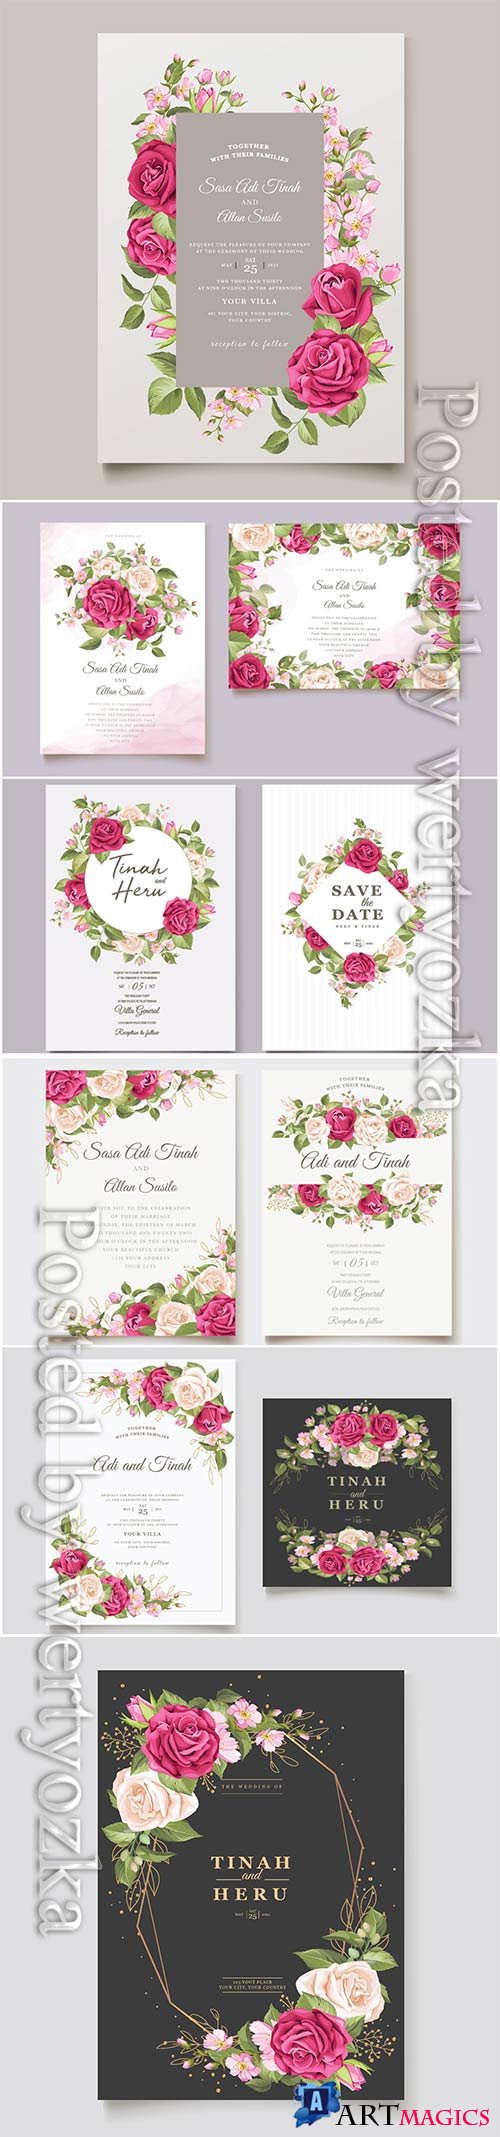 Wedding invitation cards with flowers in vector